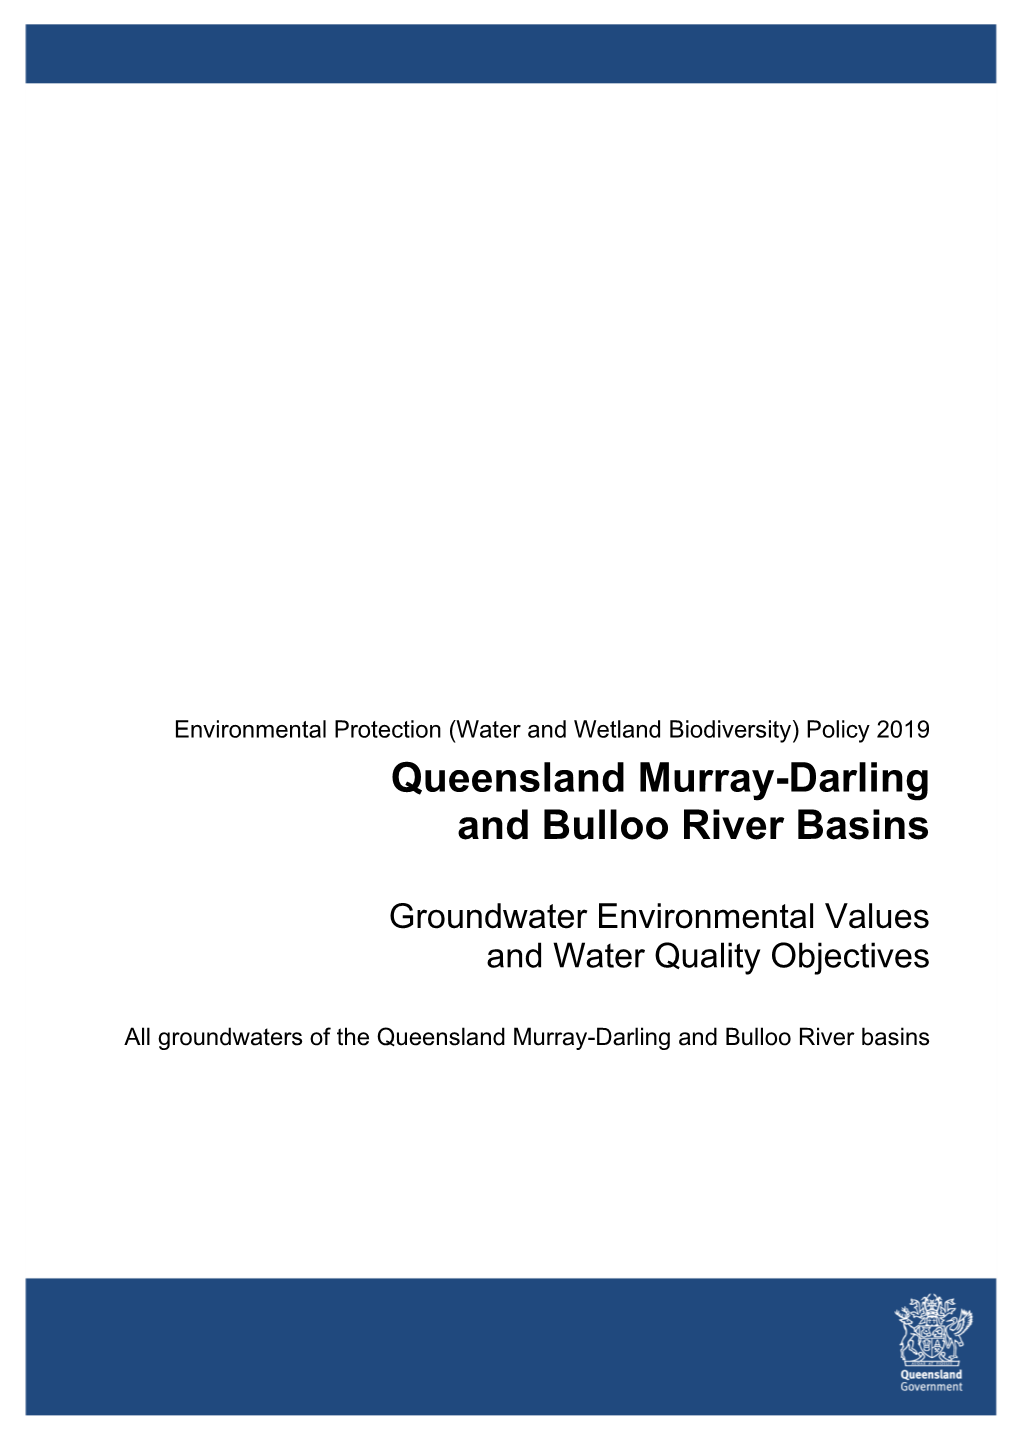 Queensland Murray-Darling and Bulloo River Basins Groundwaters1-4